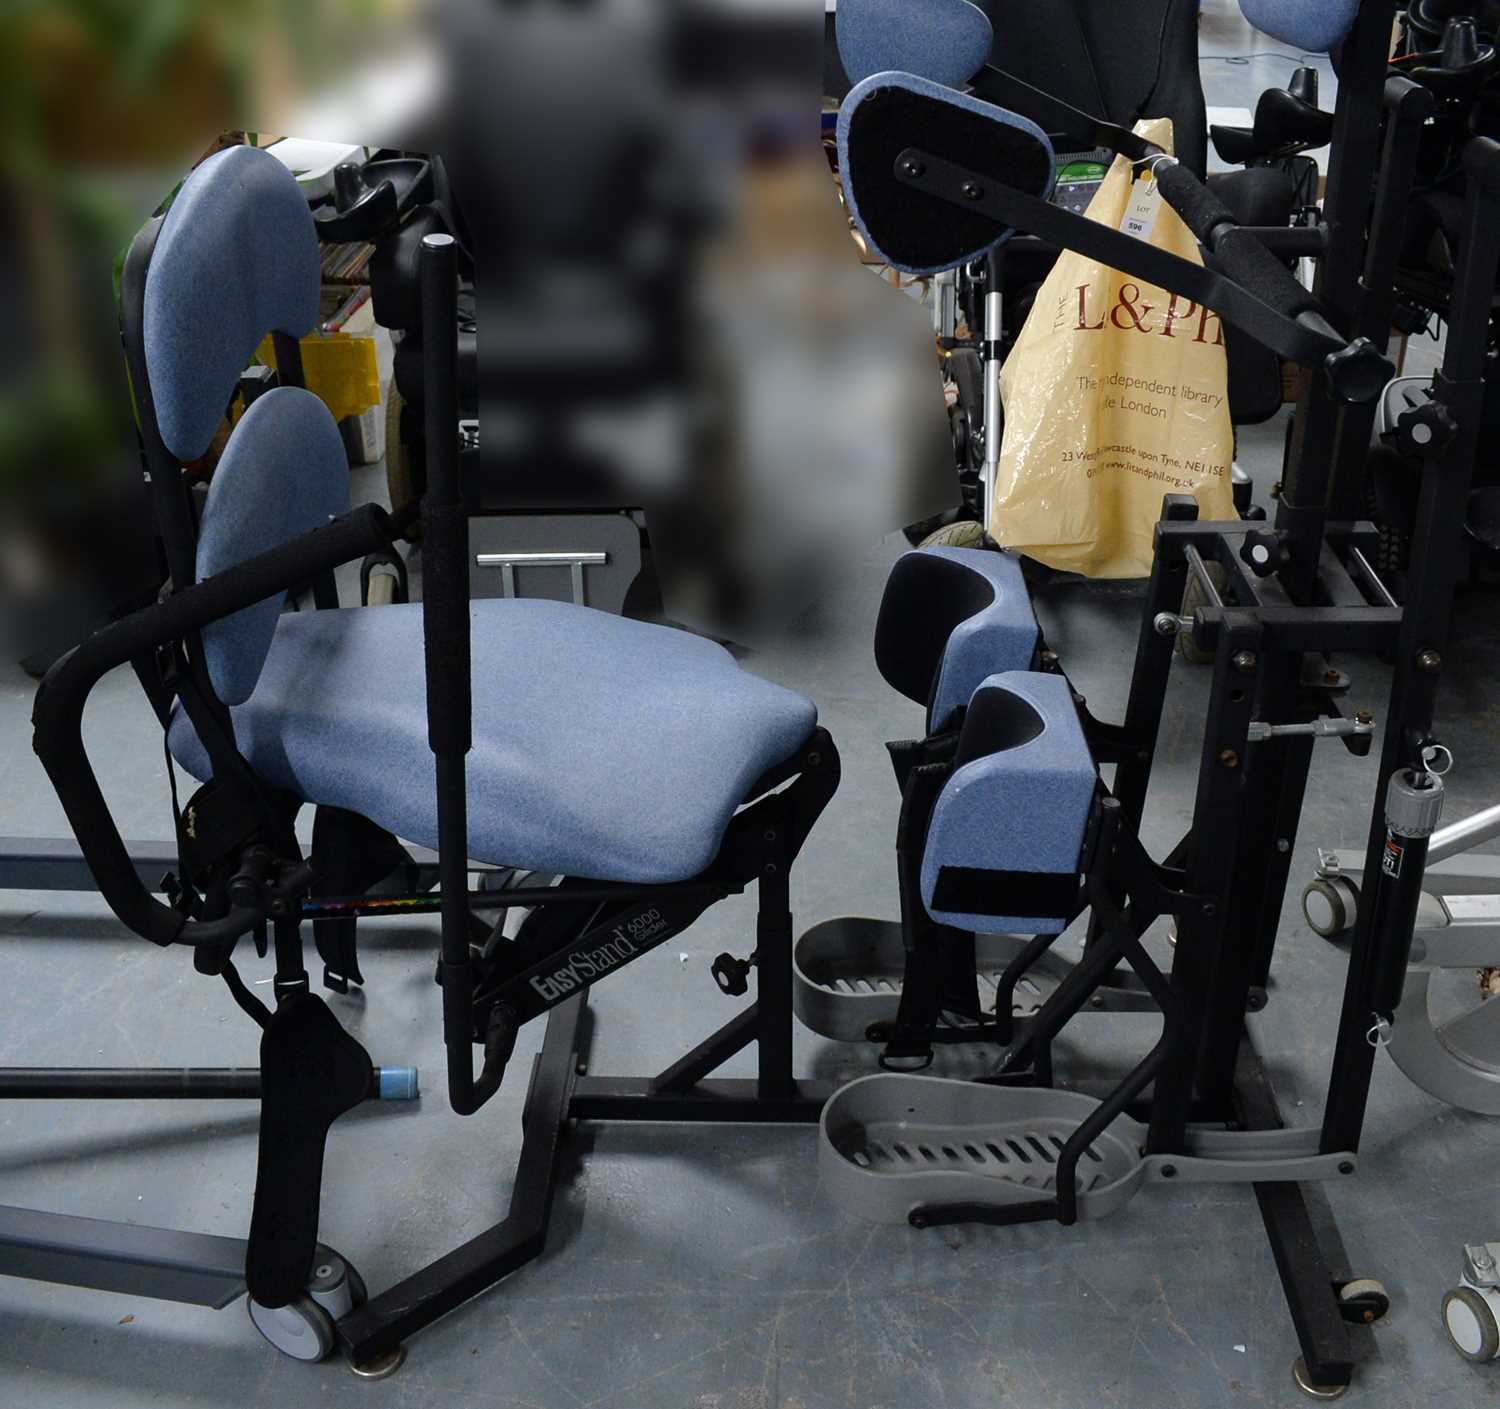 Lot 596 - An EasyStand 6000 Glider therapy exercise machine.